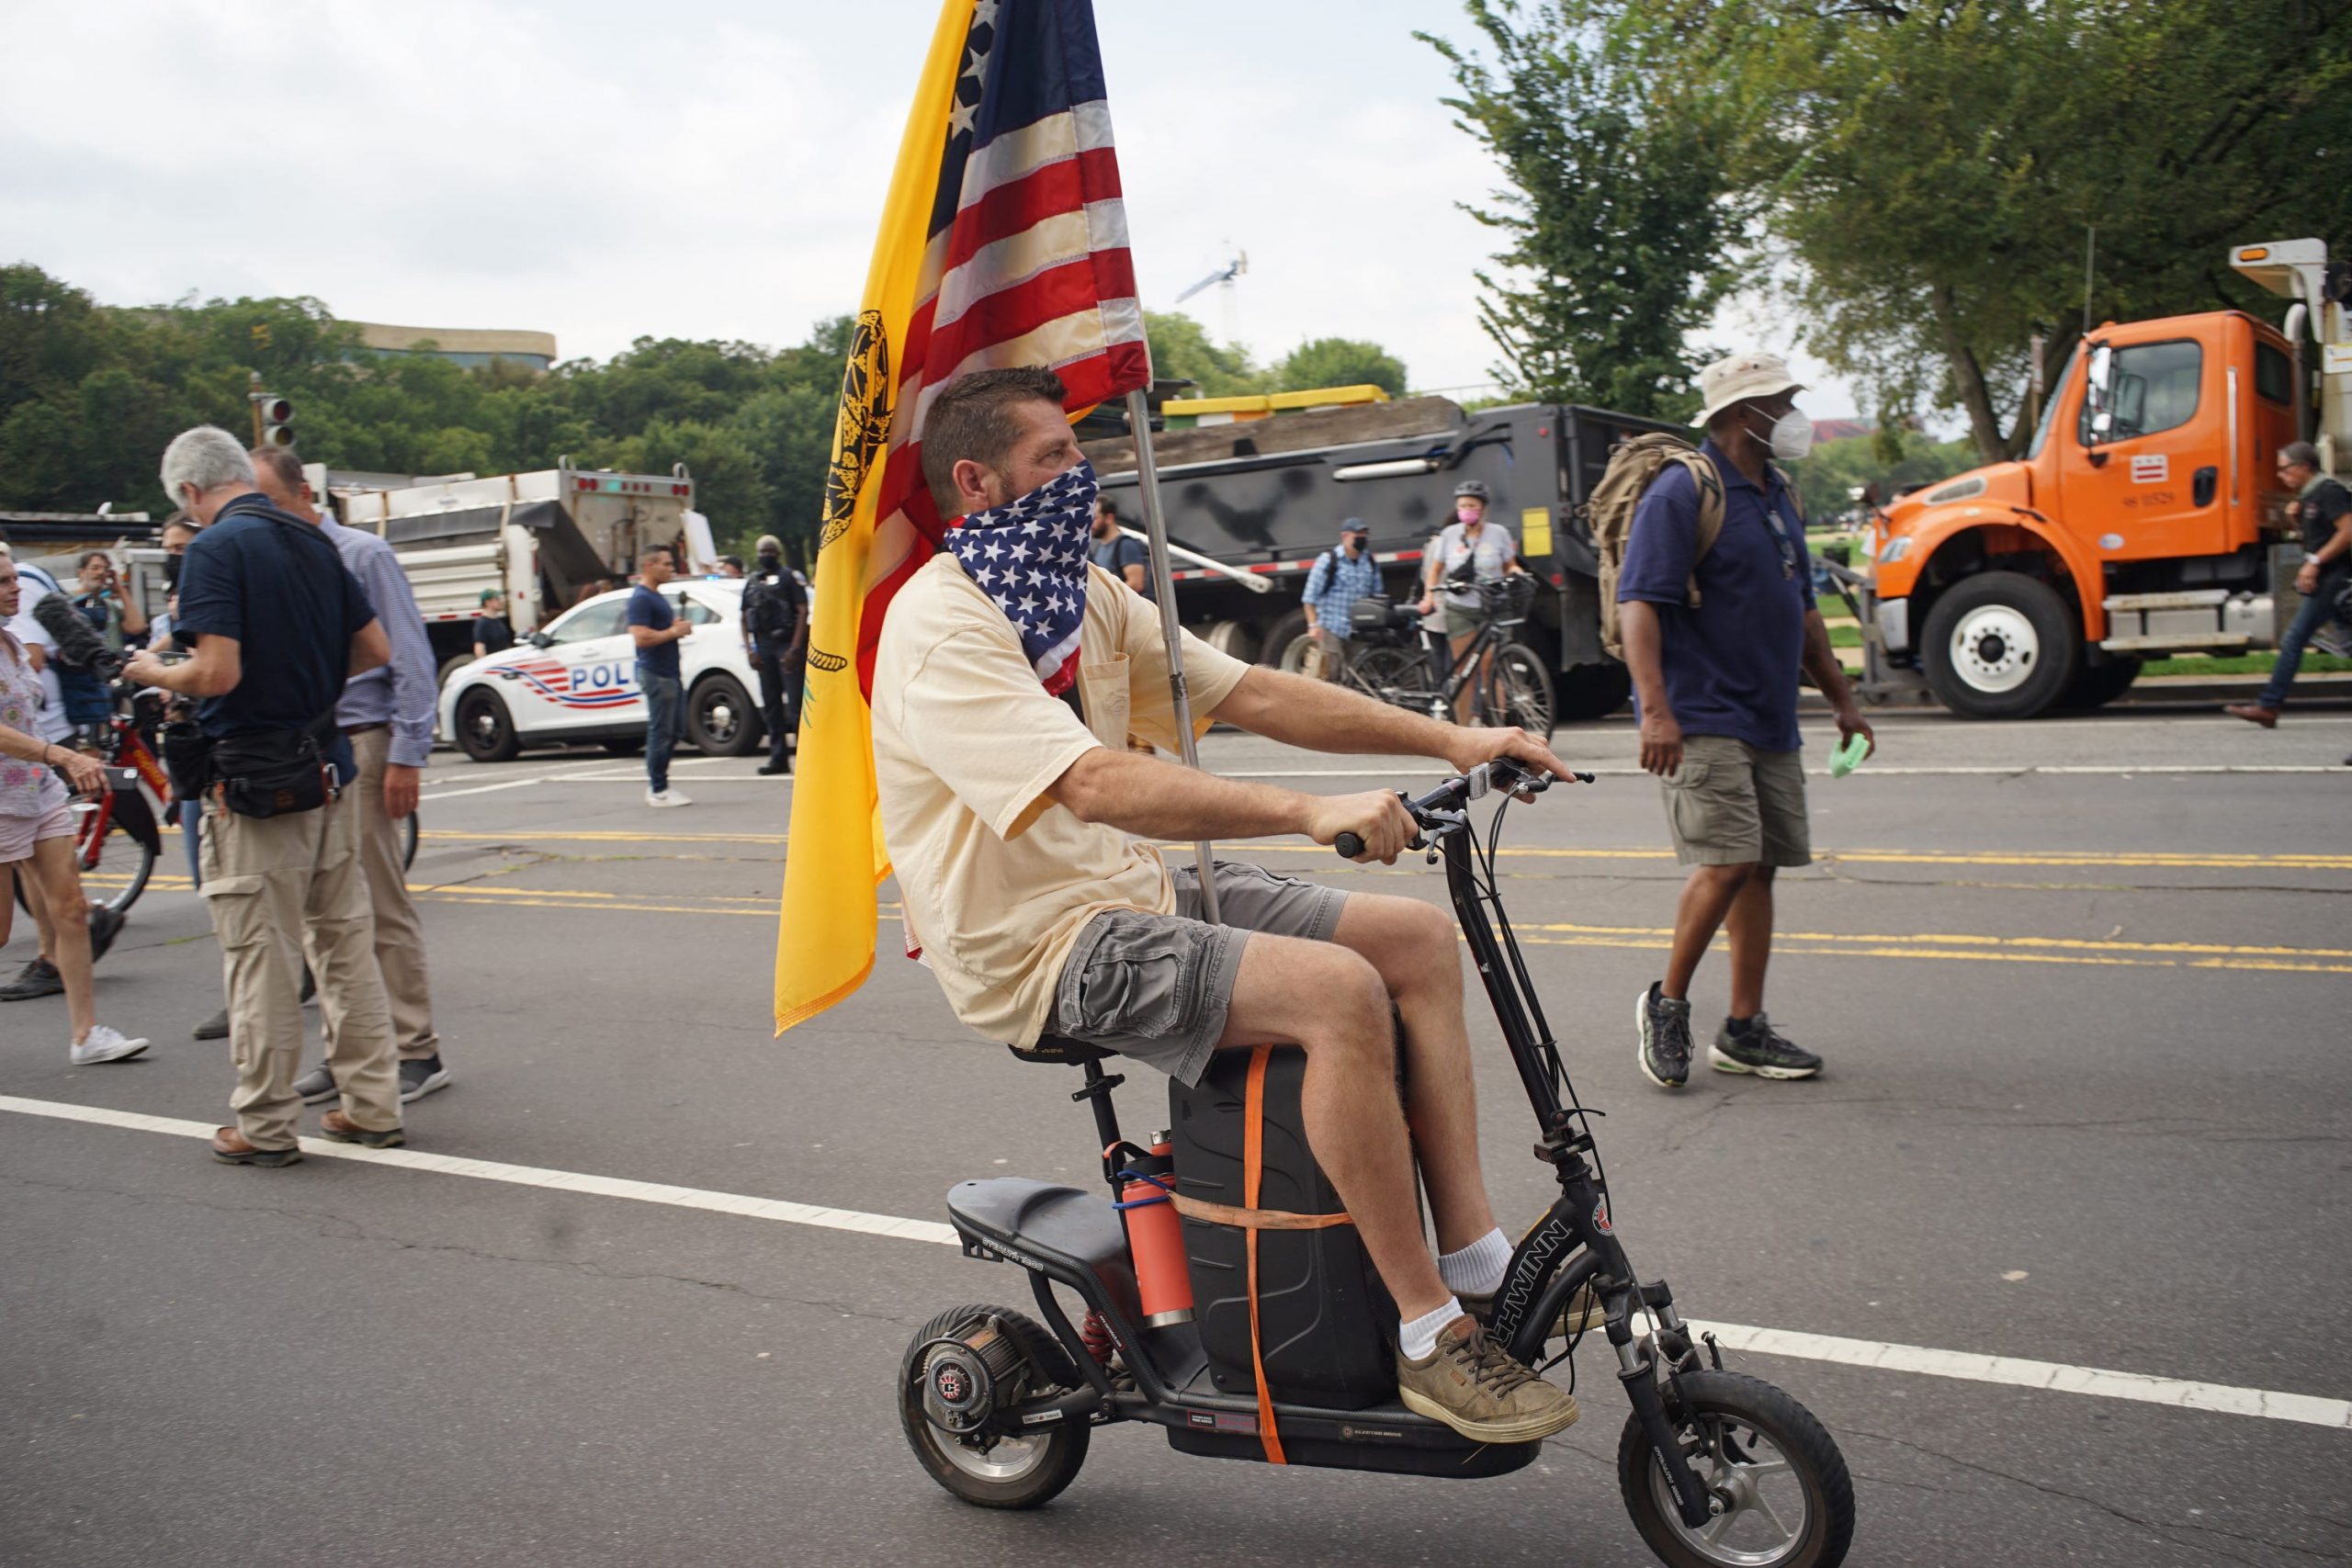 A man on a scooter with an American flag.